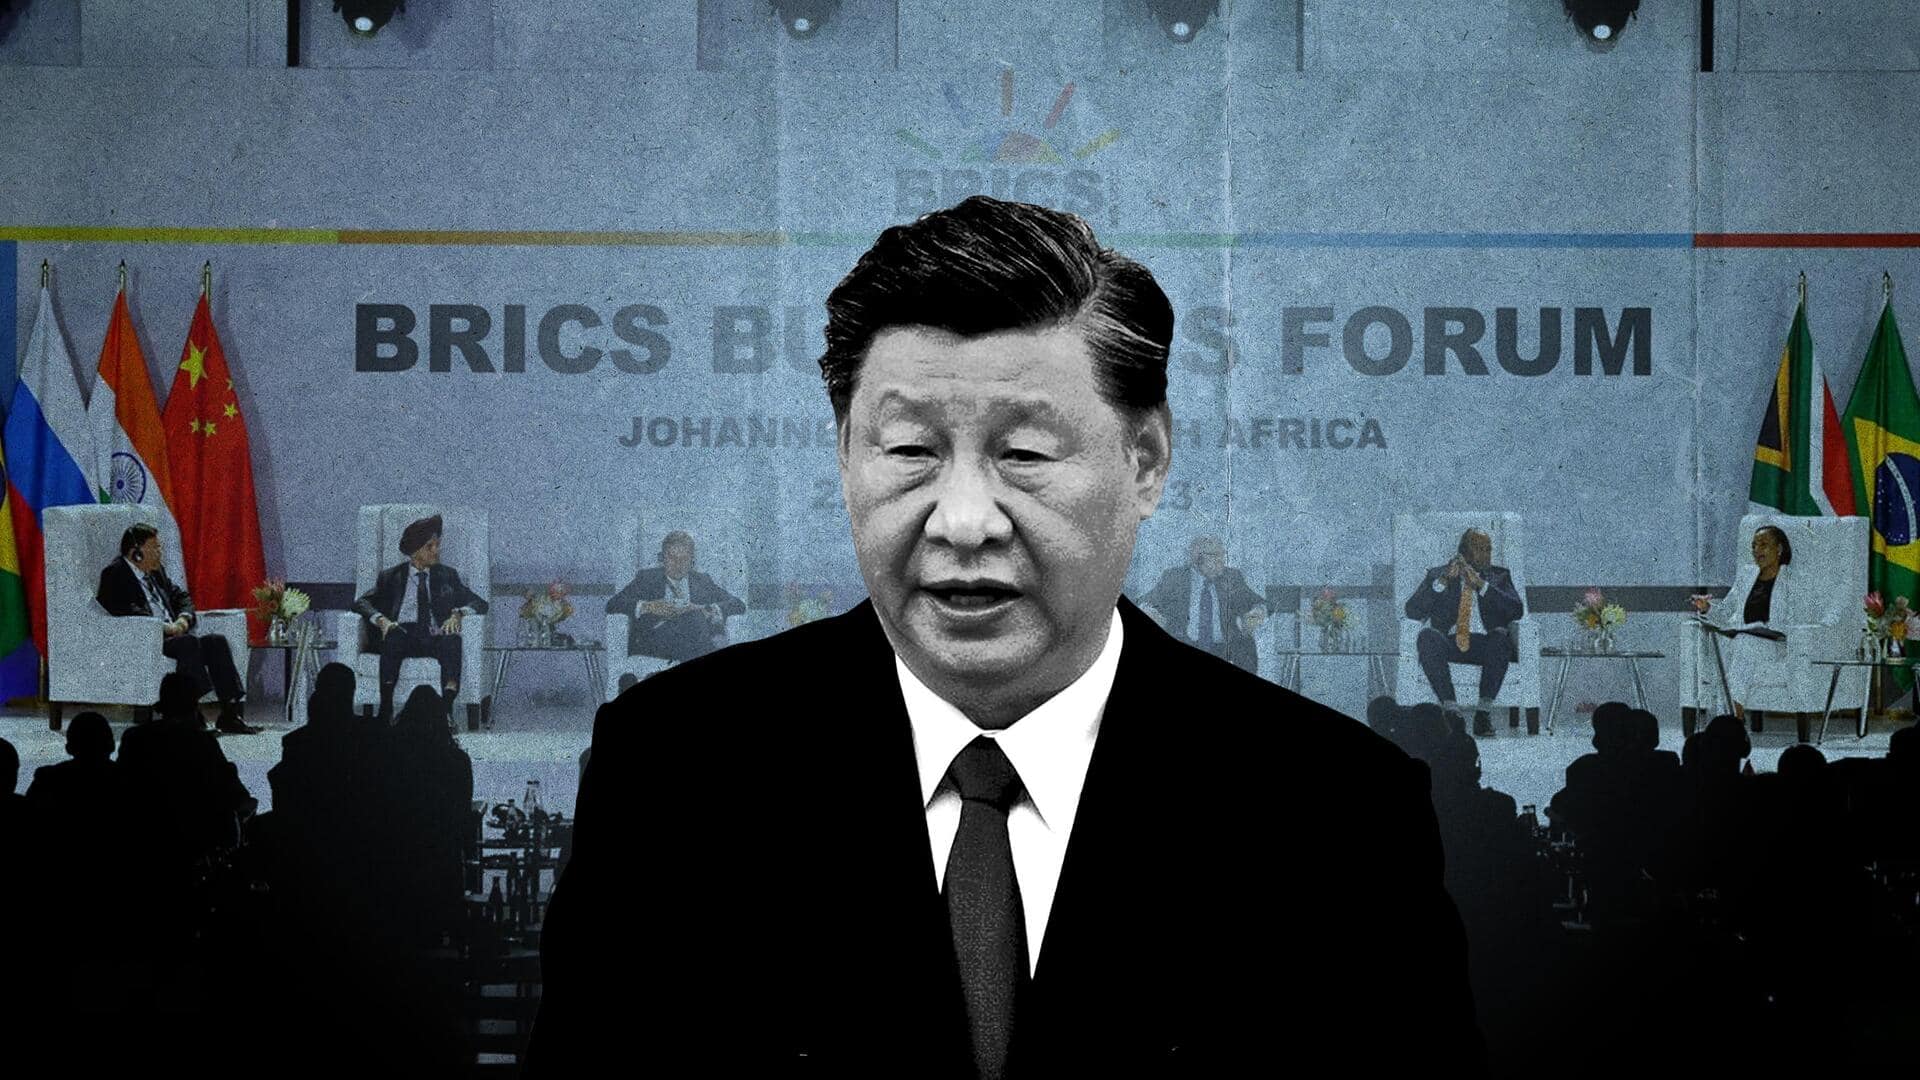 Xi Jinping's mysterious absence at BRICS Business Forum raises questions